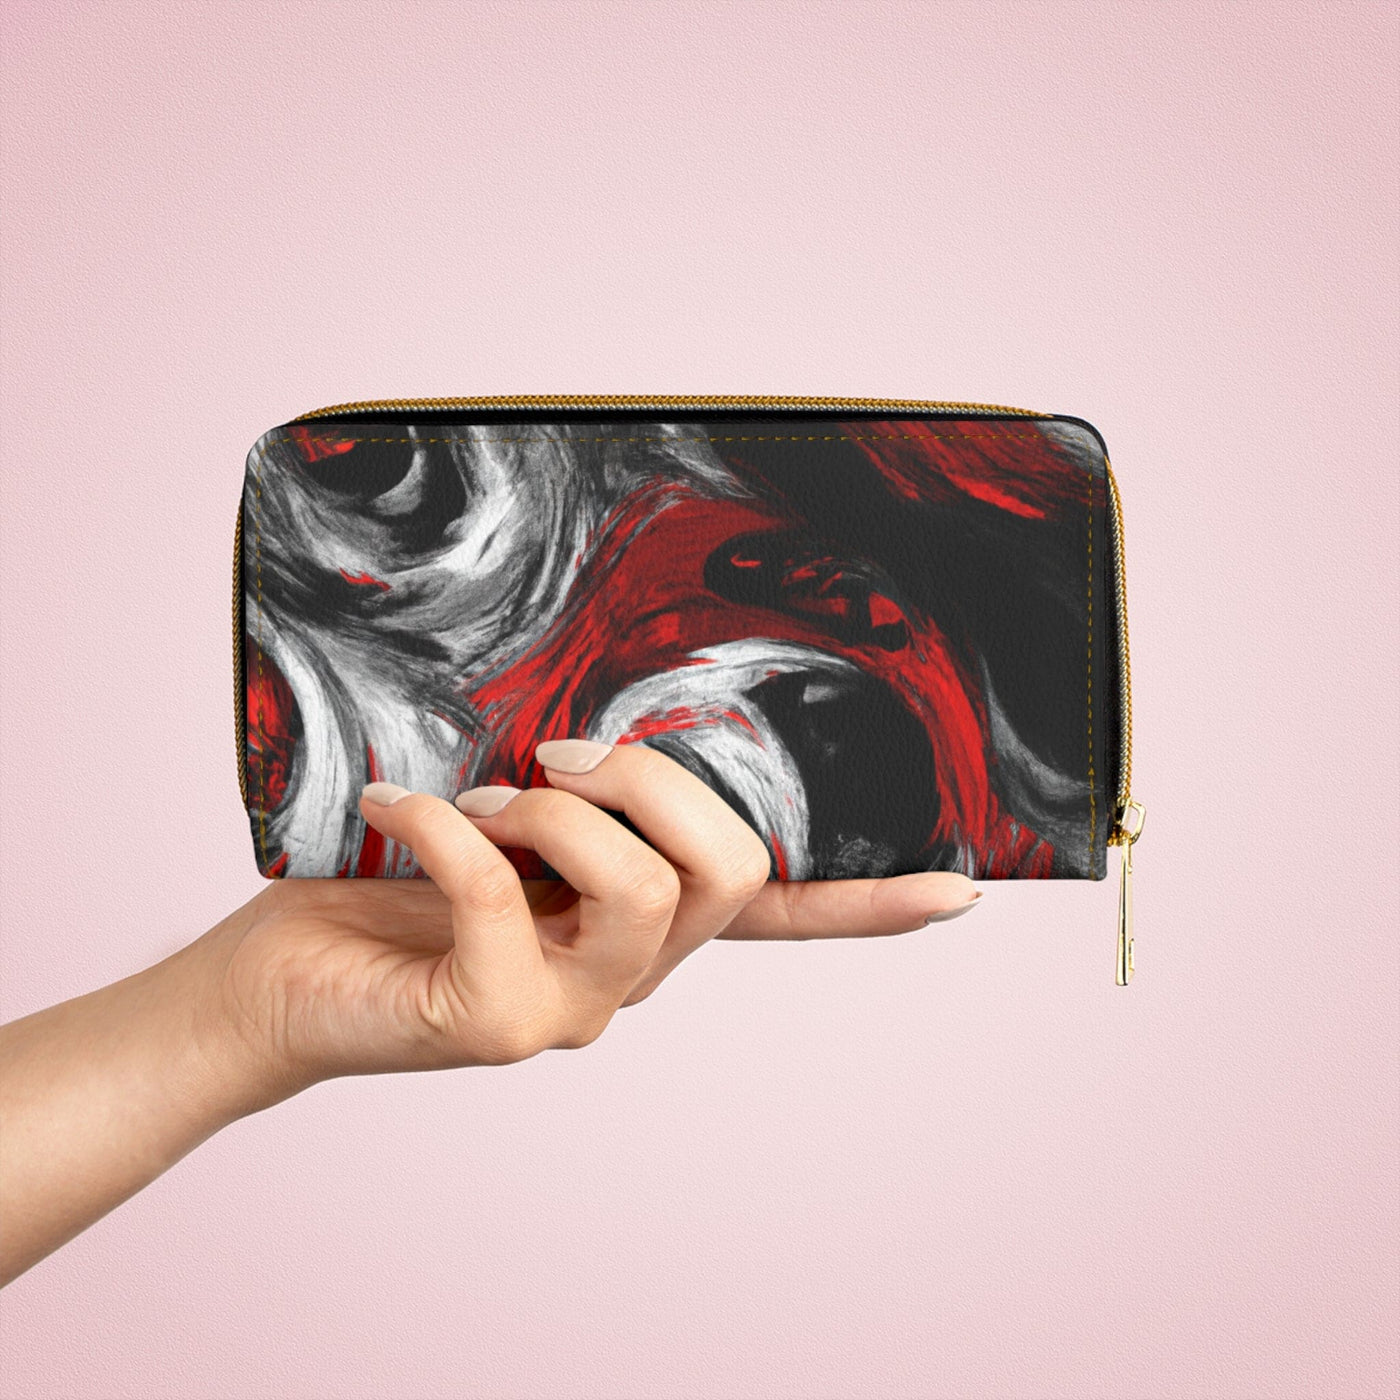 Decorative Black Red White Abstract Seamless Pattern Womens Zipper Wallet